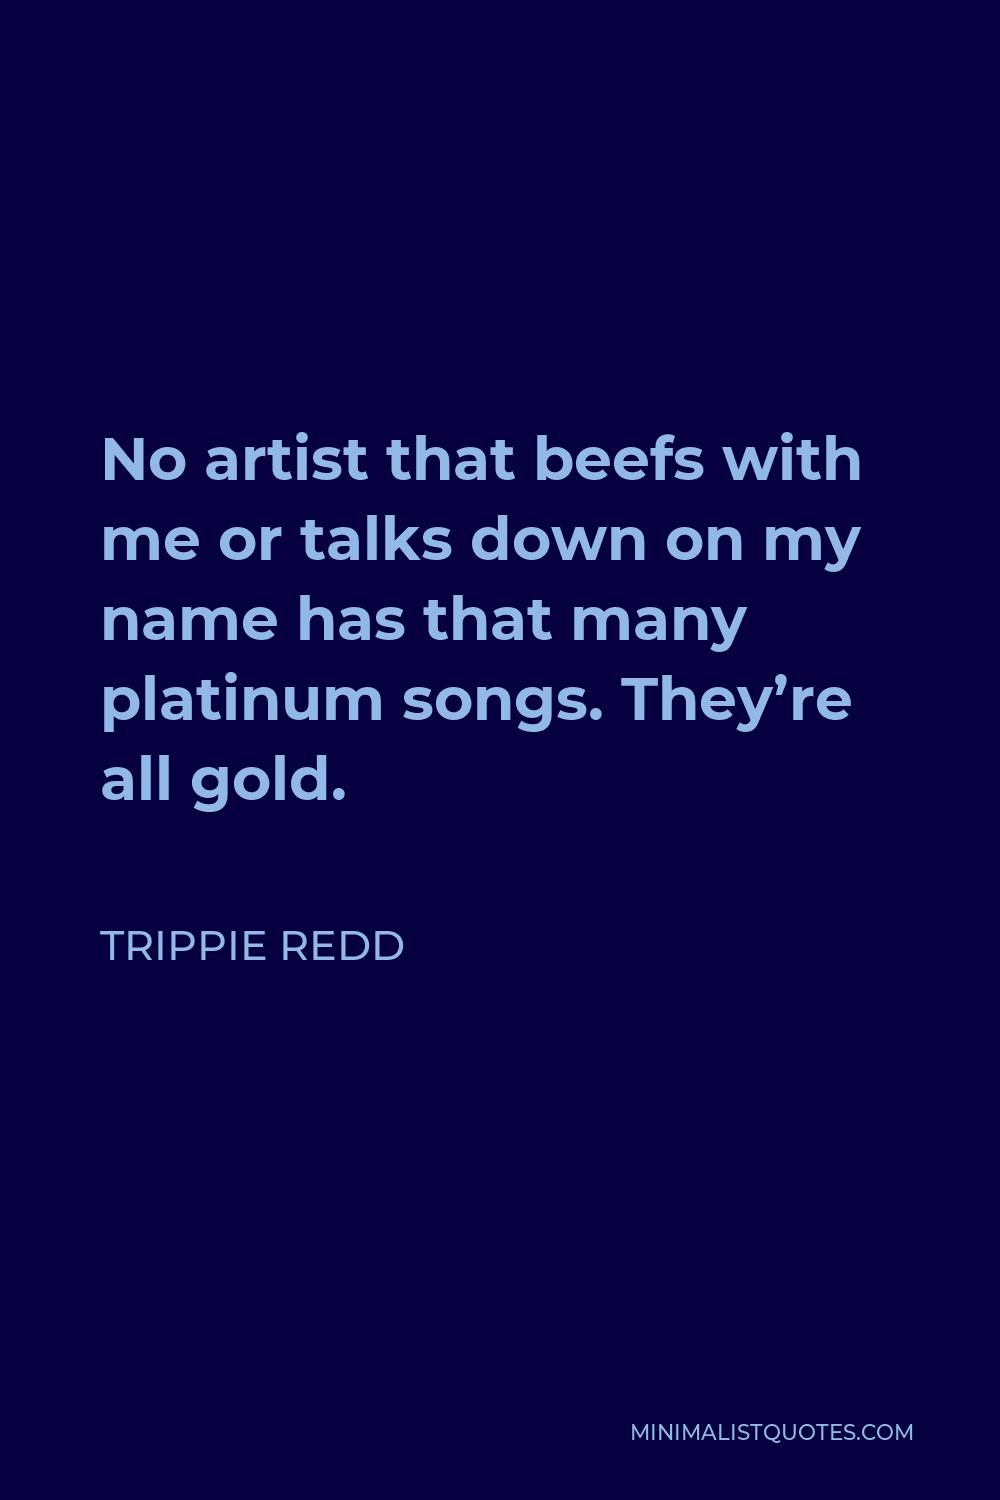 Trippie Redd Quote - No artist that beefs with me or talks down on my name has that many platinum songs. They’re all gold.